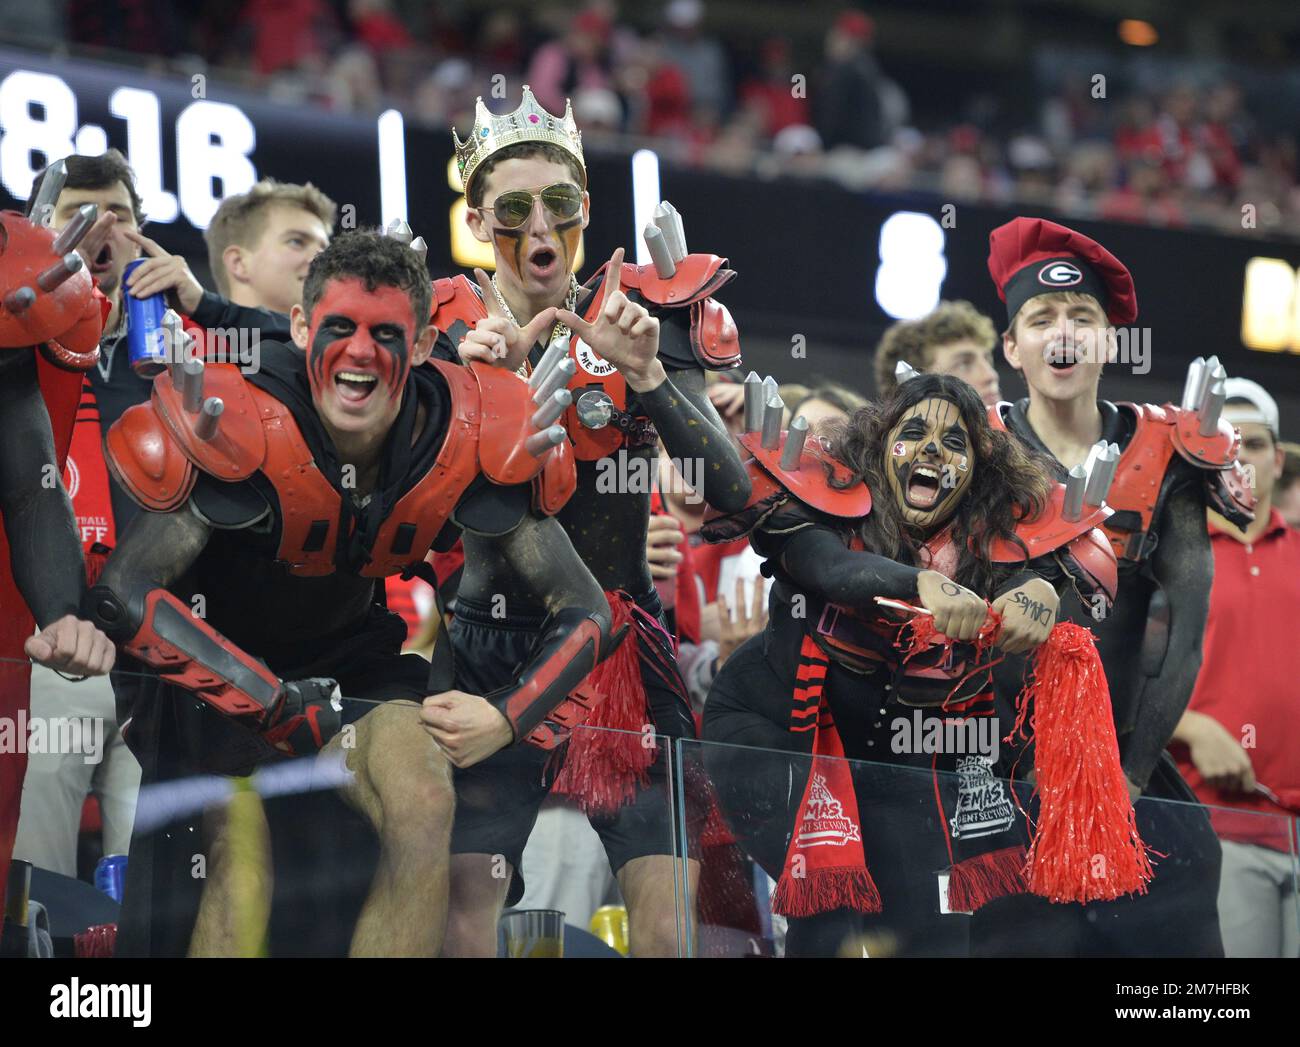 Inglewood, United States. 09th Jan, 2023. Georgia Bulldogs cheer before the start of the game against the TCU Horned Frogs at the 2023 NCAA College Football National Championship between Georgia and TCU at SoFi Stadium in Inglewood, California, on Monday, January 9, 2023. Photo by Mike Goulding/UPI Credit: UPI/Alamy Live News Stock Photo